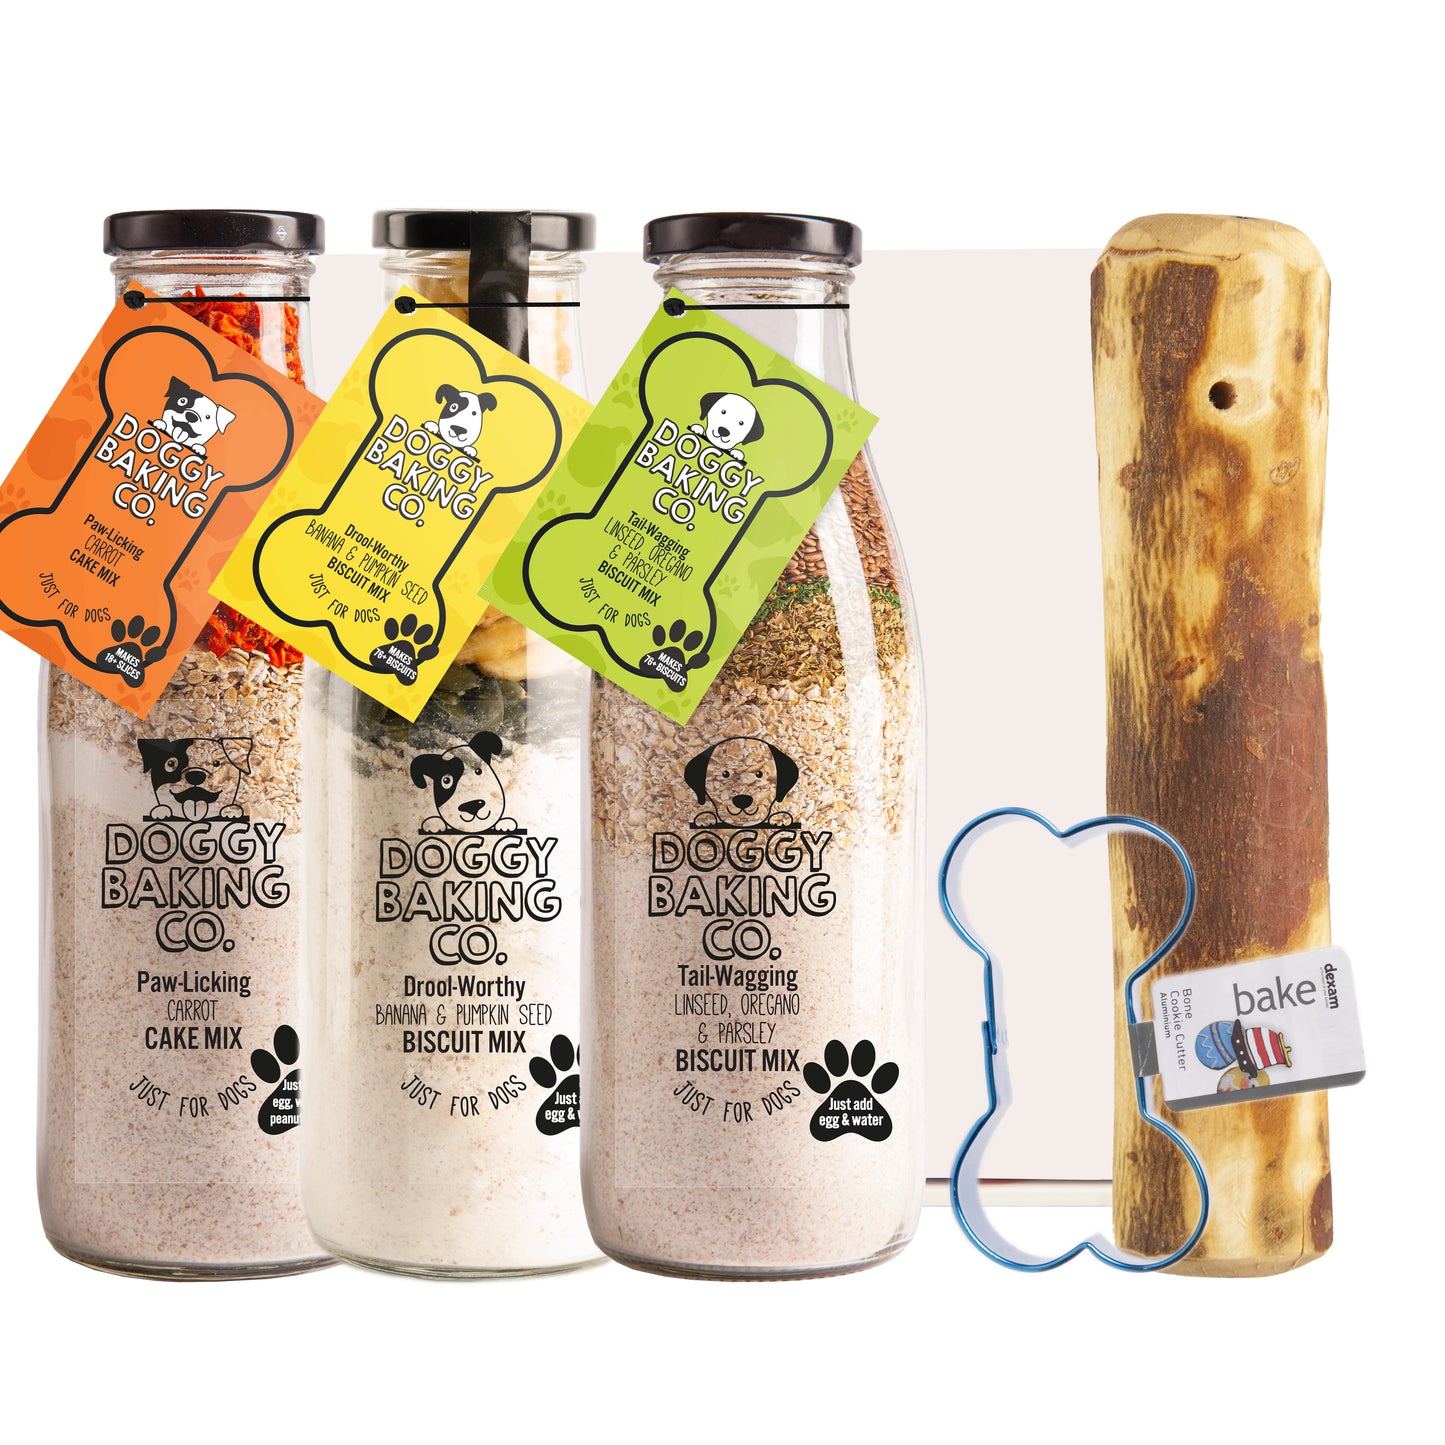 Ultimate Doggy Baking Bottles, Bone Cutter & Olivewood Chew in a Gift Box - Doggy Baking Co by The Bottled Baking Co